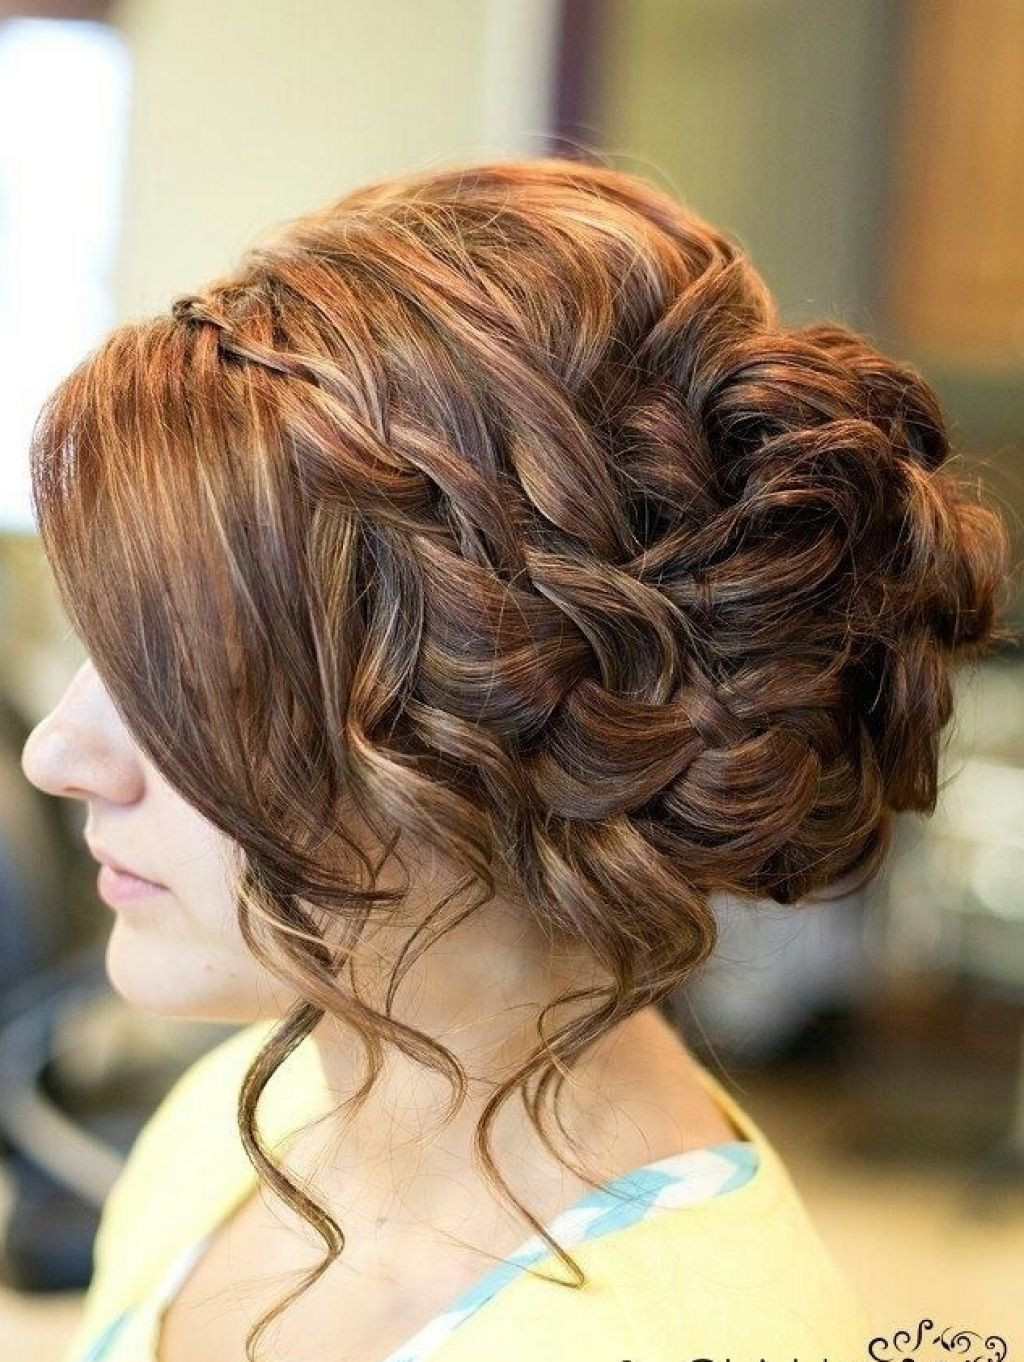 Updo Braid Hairstyles
 14 Prom Hairstyles For Long Hair That Are Simply Adorable